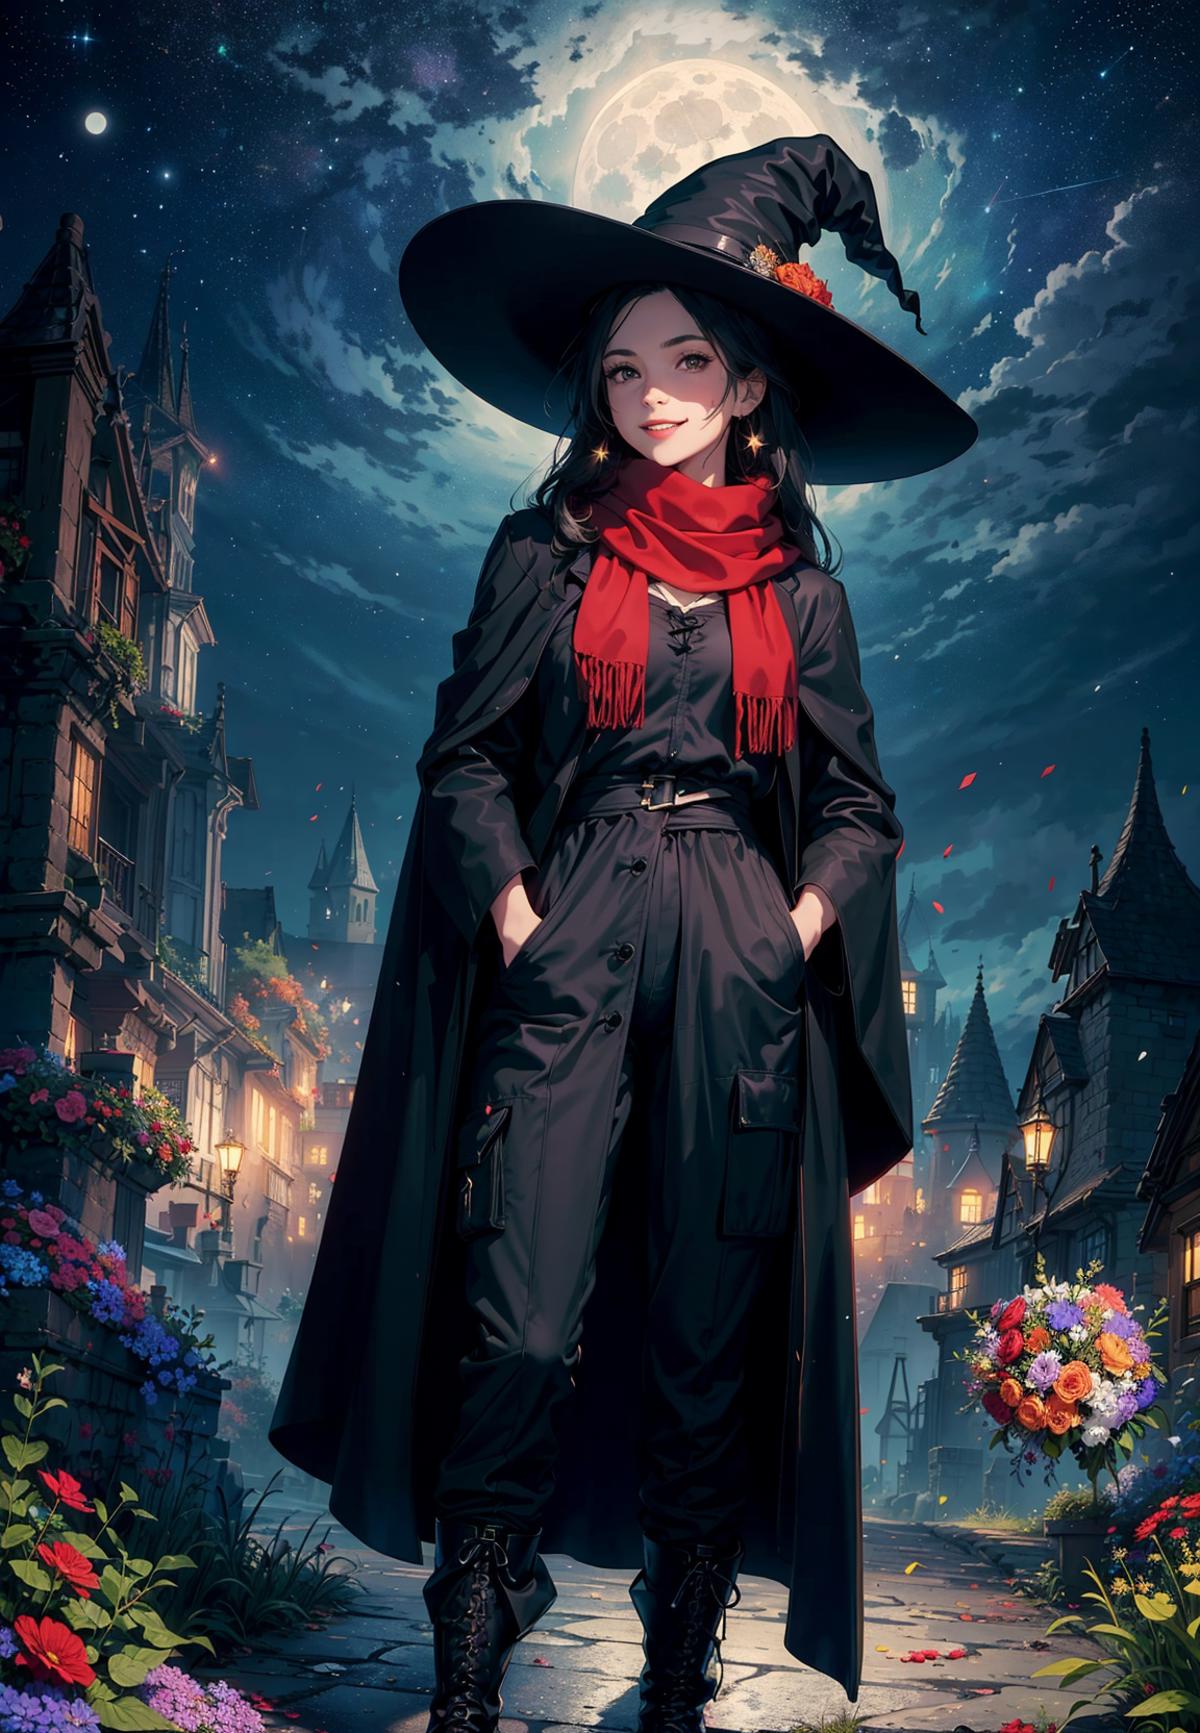 A cartoon woman dressed as a witch, wearing a black coat, red scarf, and a black hat with a bird on it. She is standing outside in front of a building and posing for the camera.